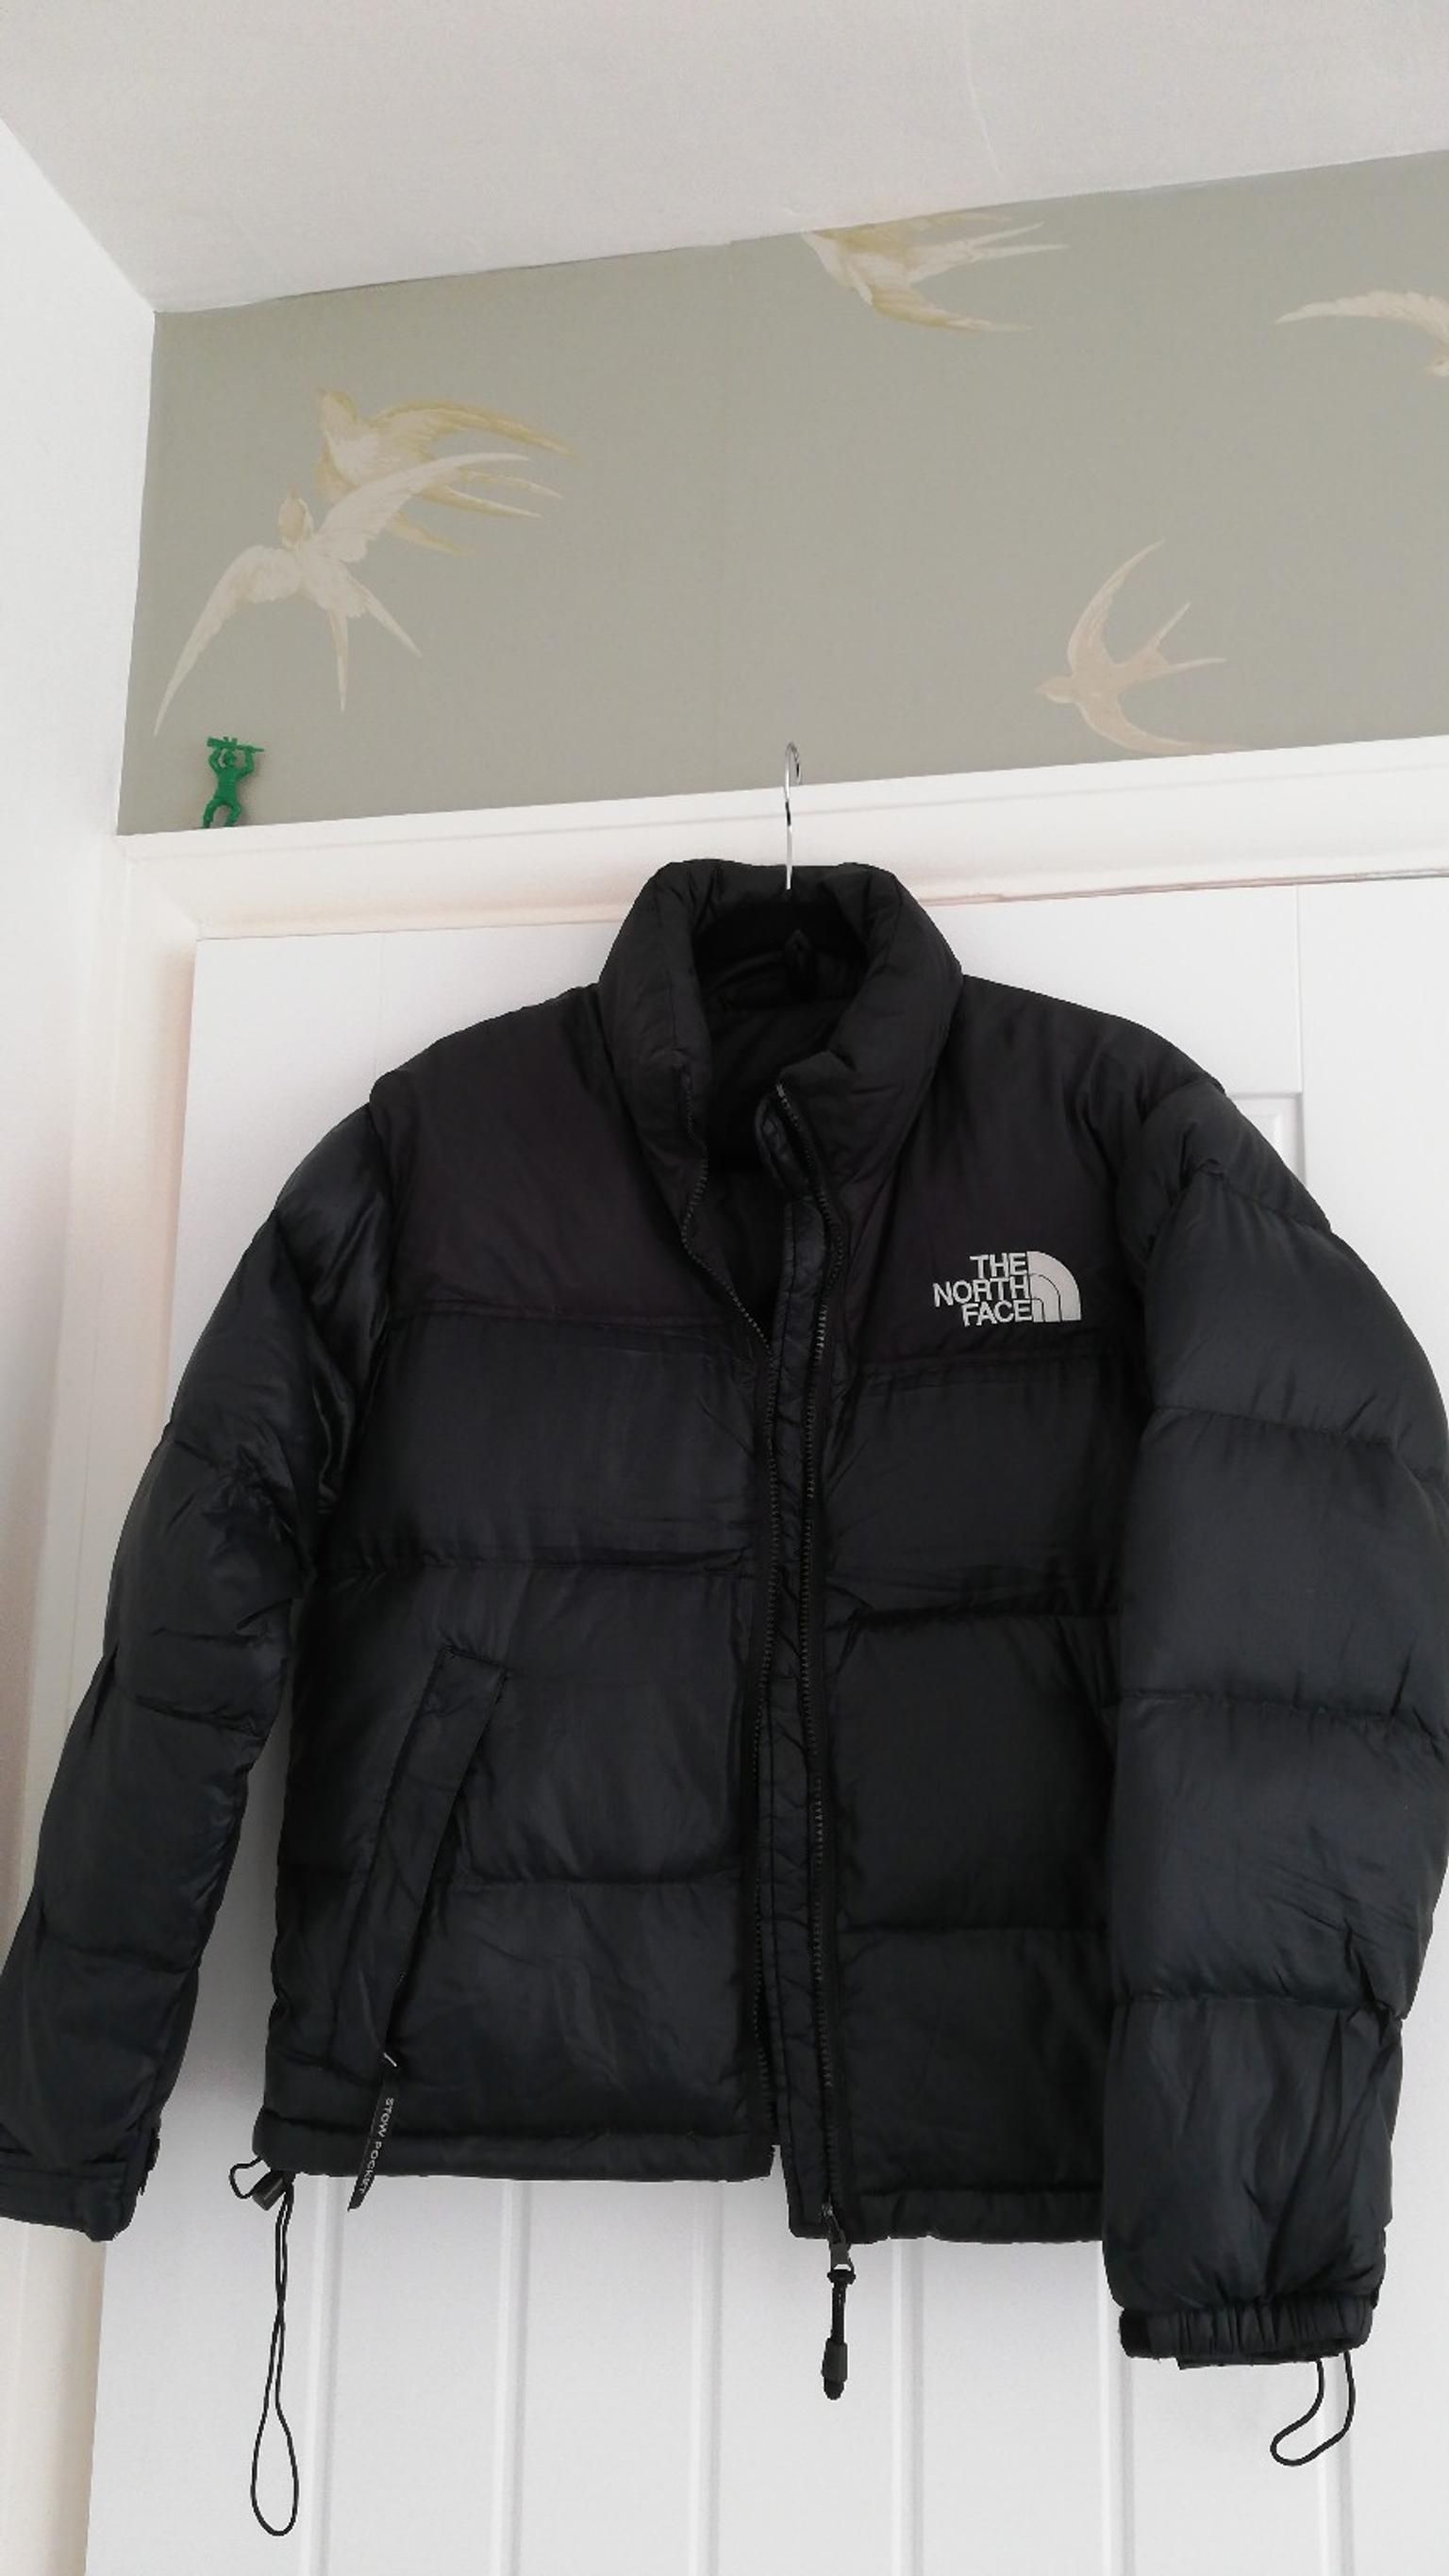 north face puffer jacket black womens